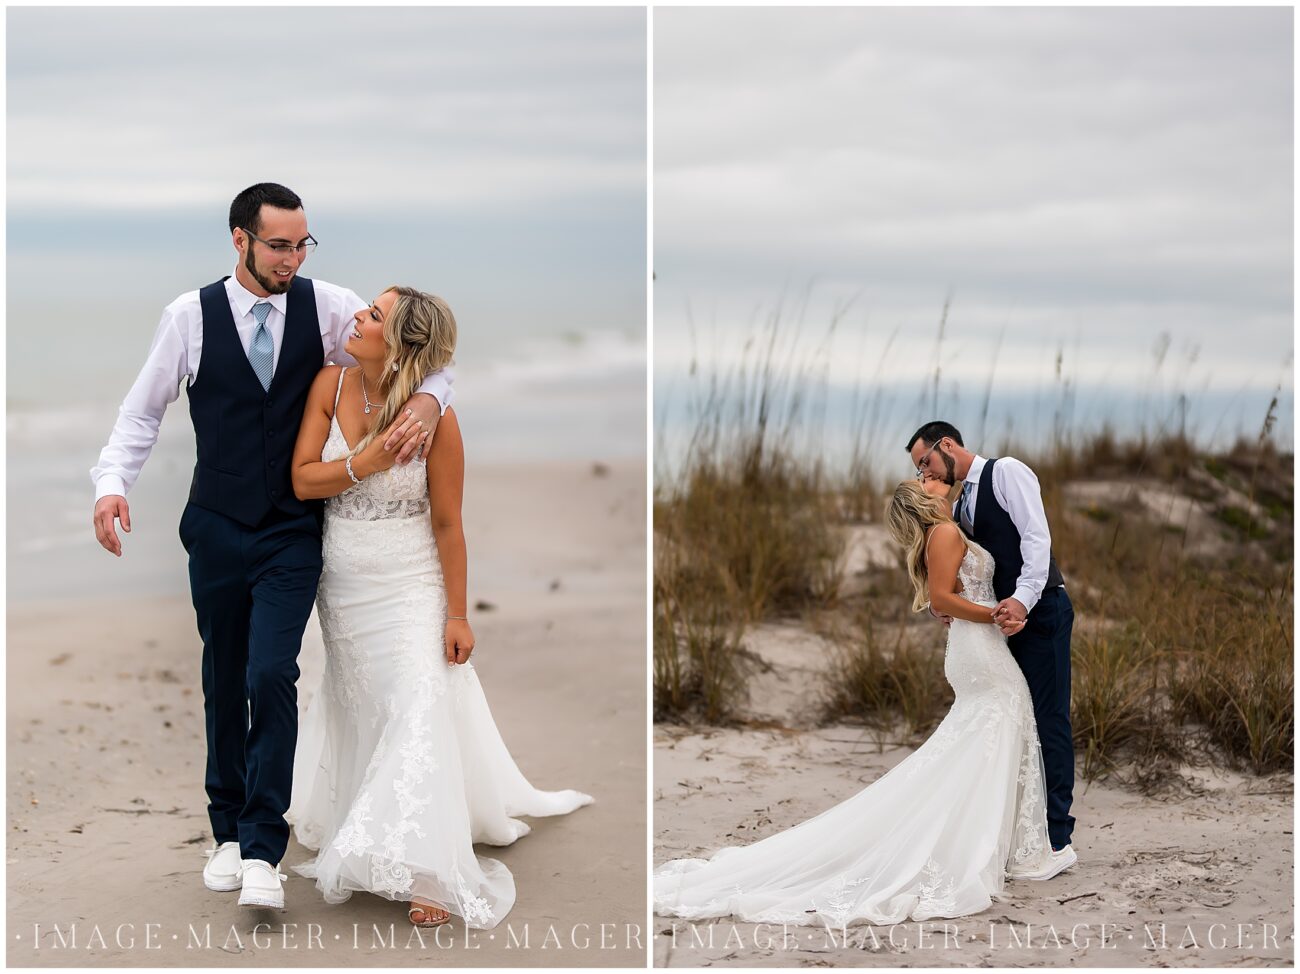 Bride Kinze steals the show with a breathtaking beachside portrait, the hues of blues mirroring her radiance.